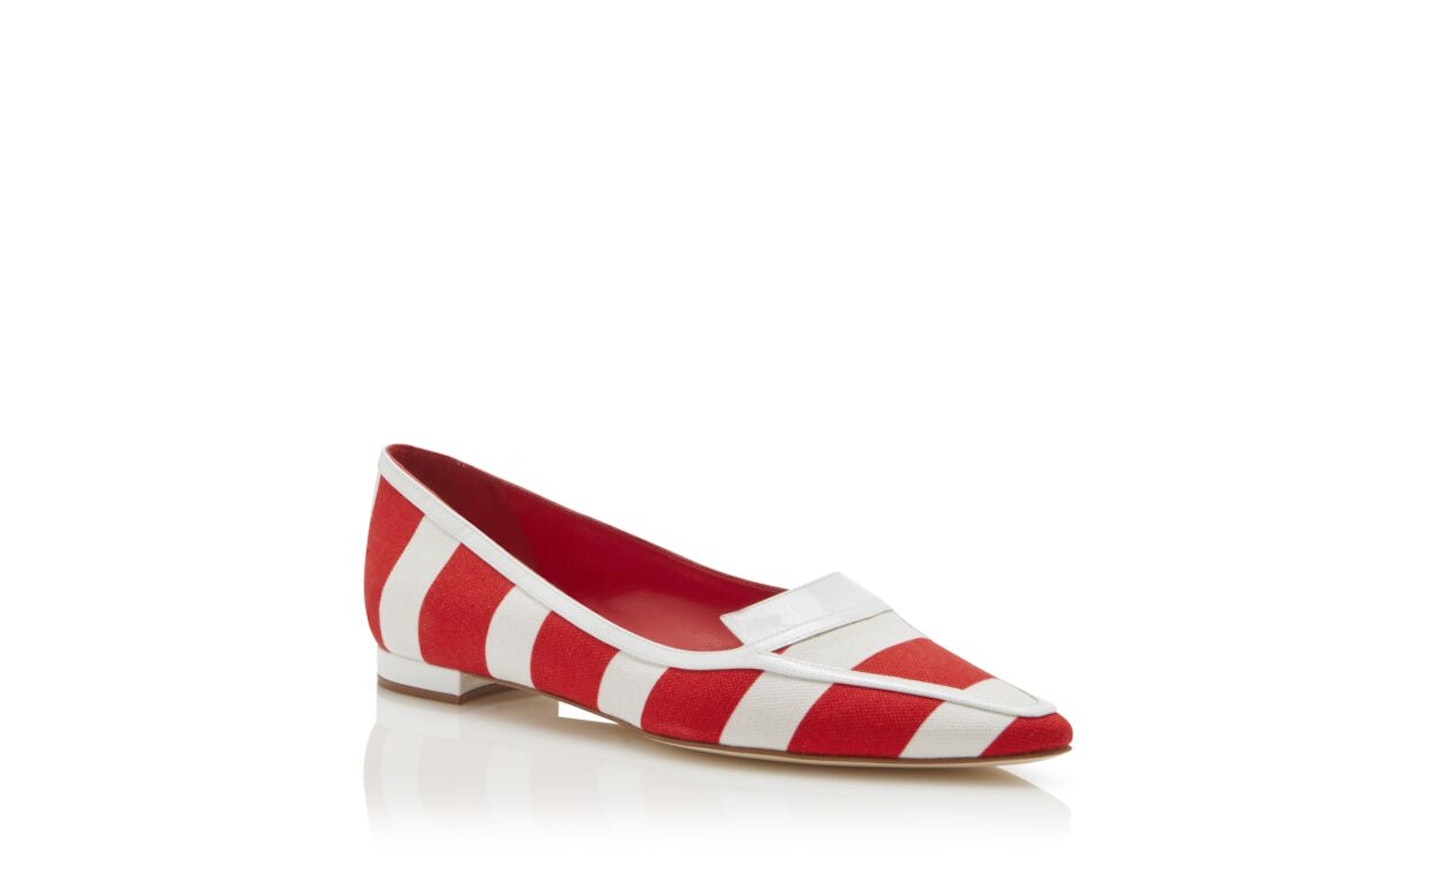 Red and White Striped Cotton Flat Shoes, WERE £595 NOW £357